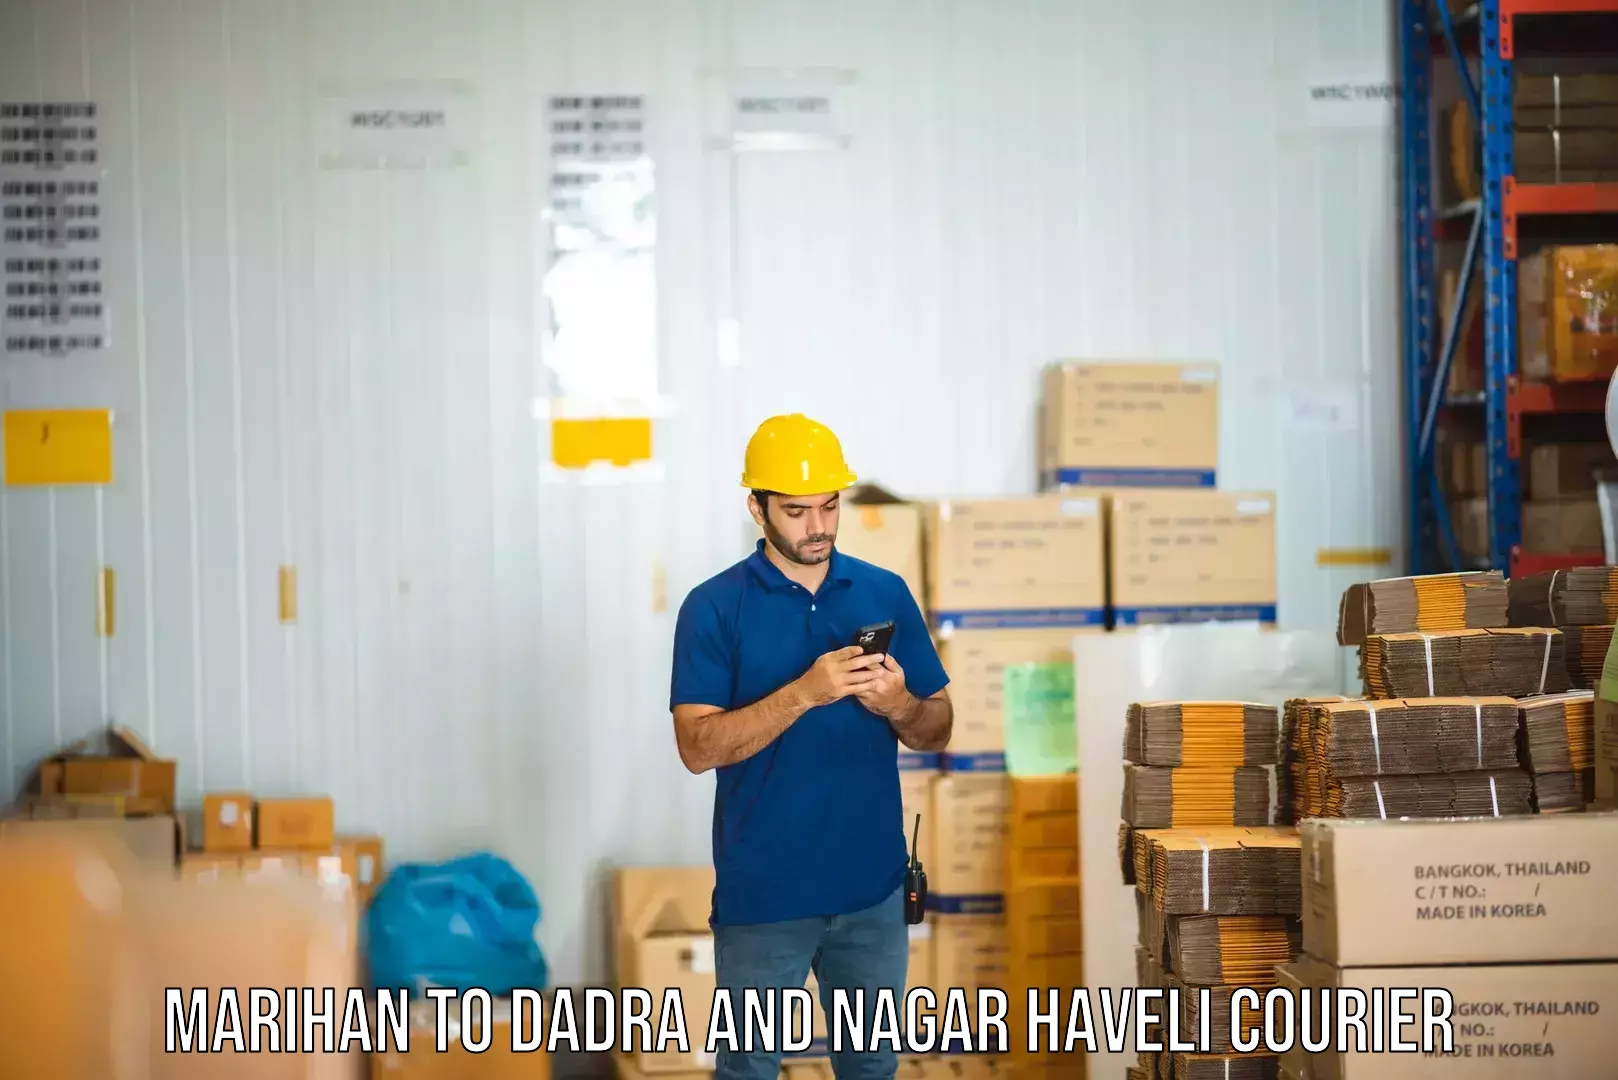 Cost-effective shipping solutions in Marihan to Dadra and Nagar Haveli